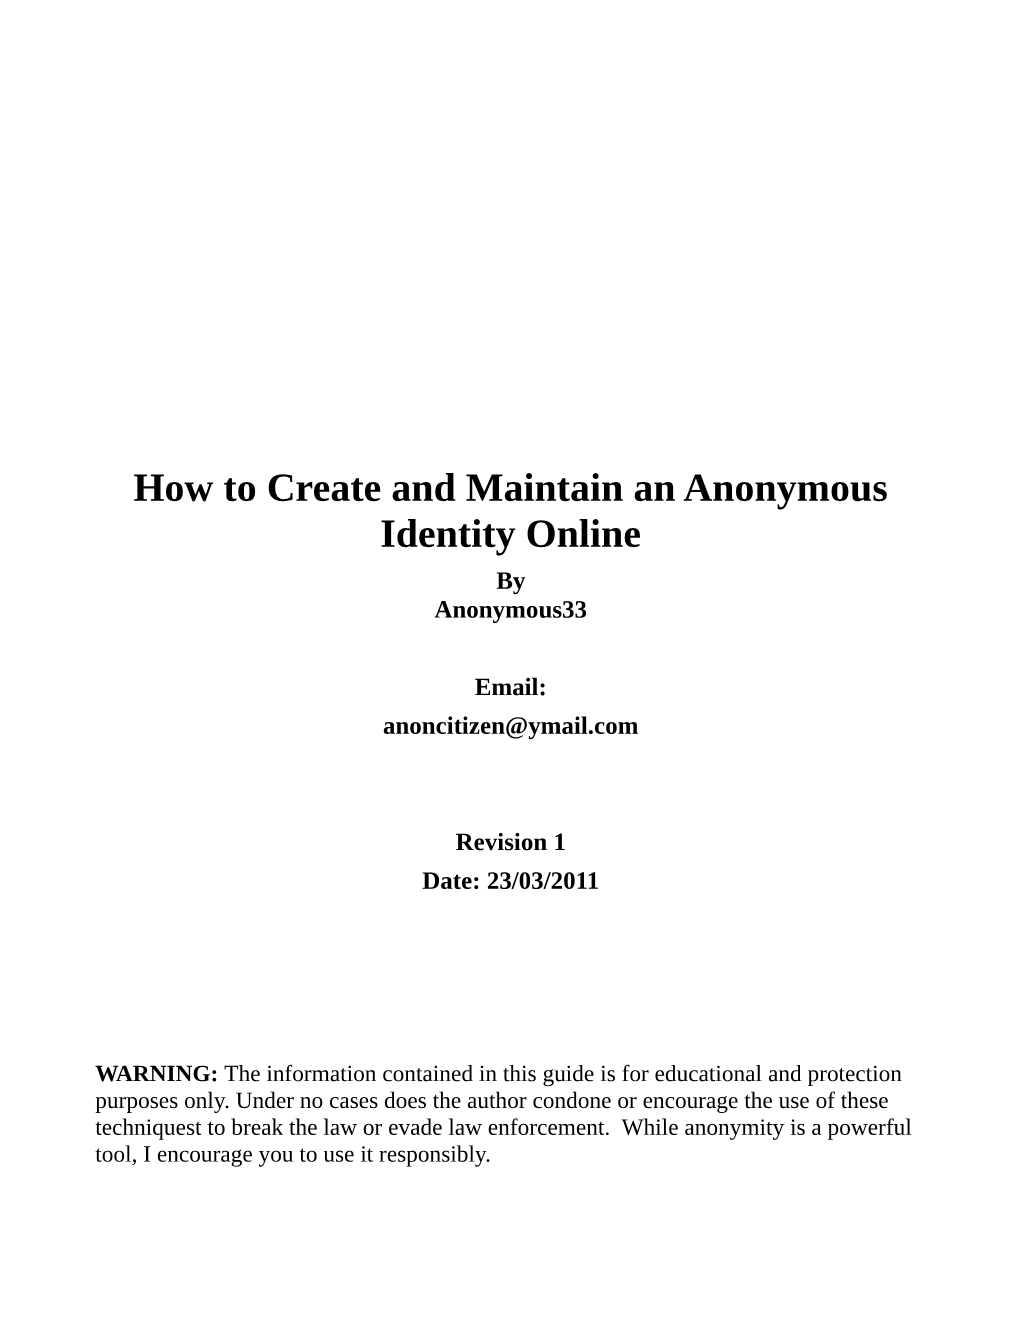 How to Create and Maintain an Anonymous Identity Online by Anonymous33